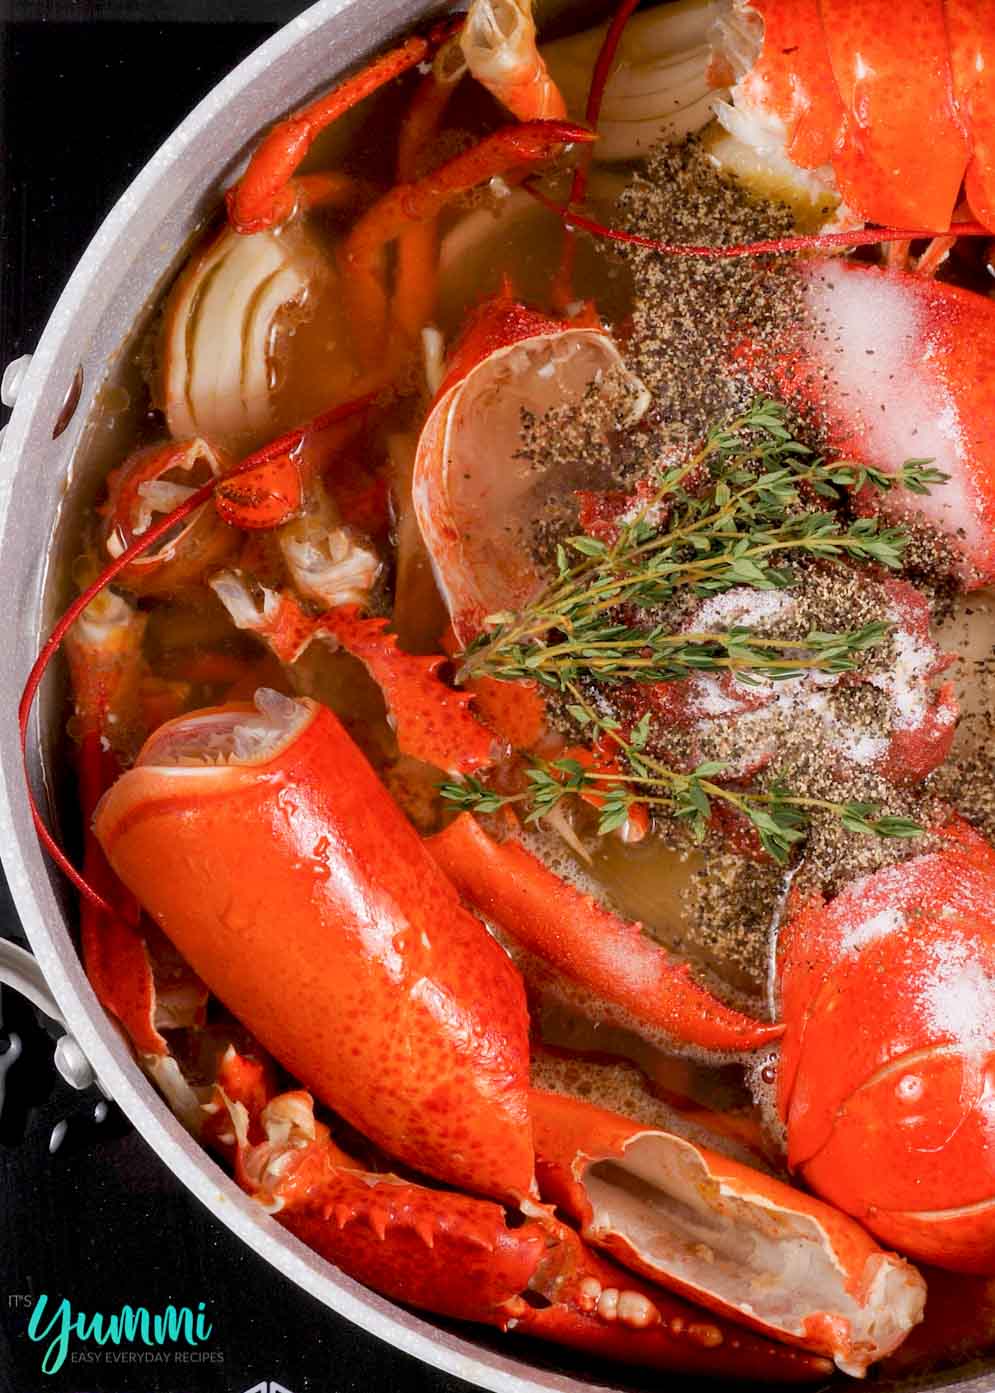 Seafood Stock Recipe - How to Make Crab Stock